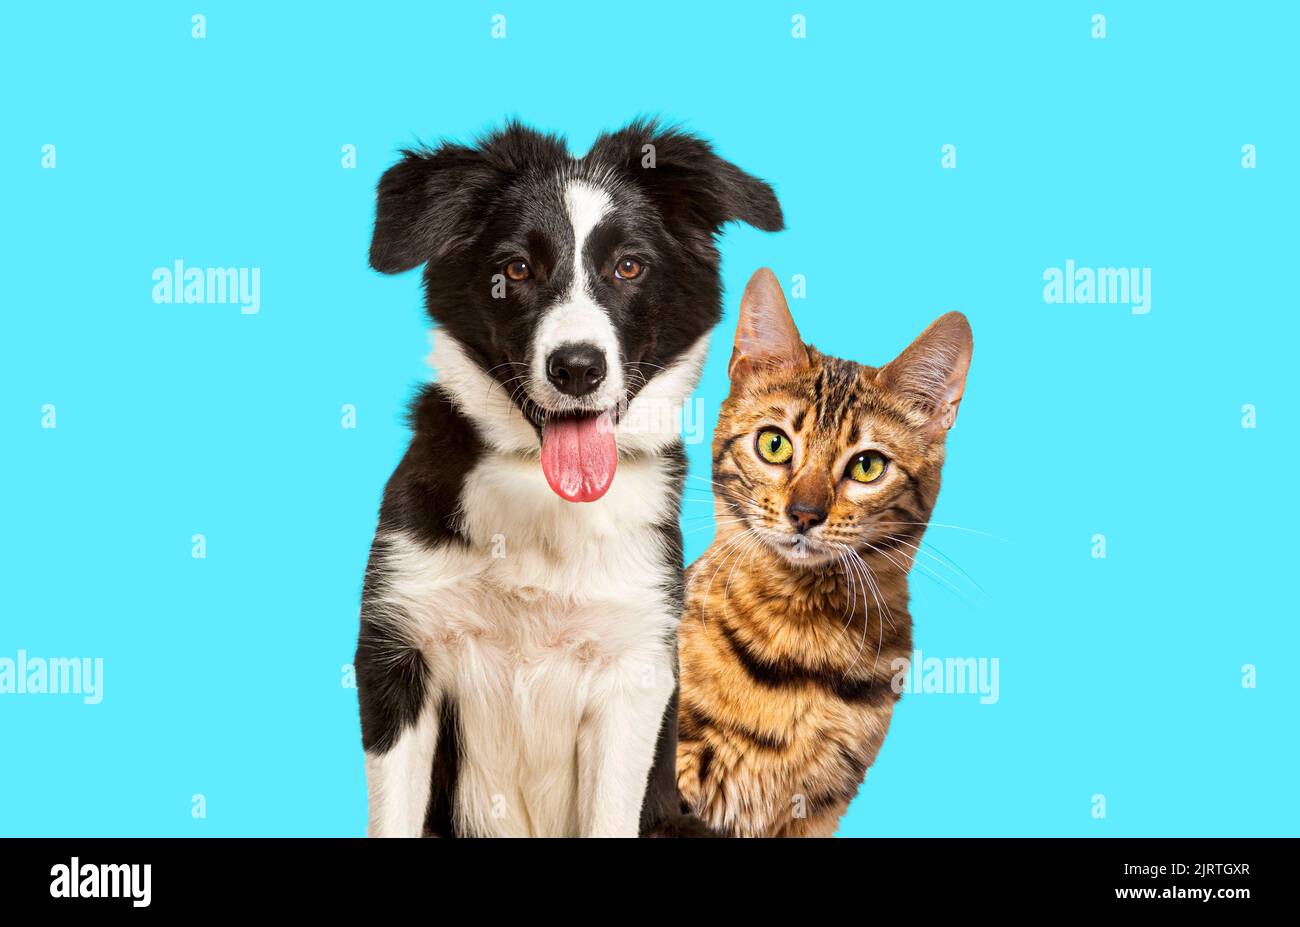 Brown bengal cat and a border collie dog with happy expression together on blue background, looking at the camera Stock Photo